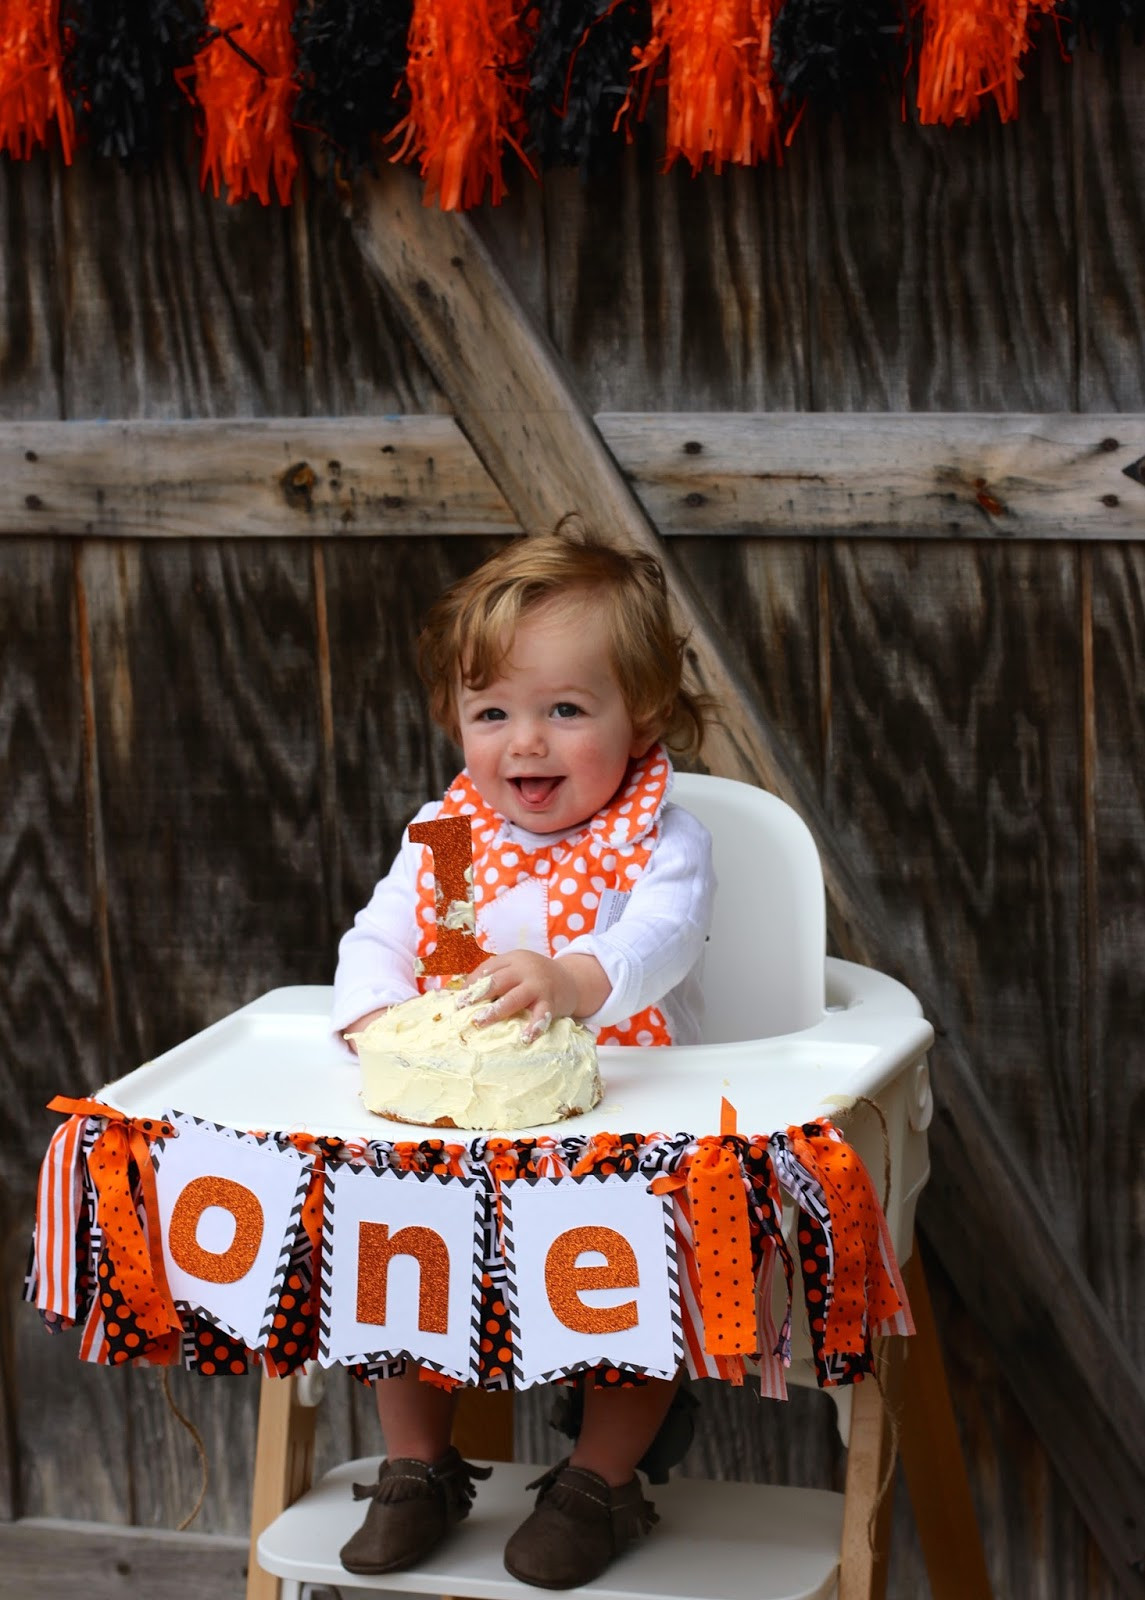 Halloween 1St Birthday Party Ideas
 A Halloween First Birthday Party Invites Decor and Party